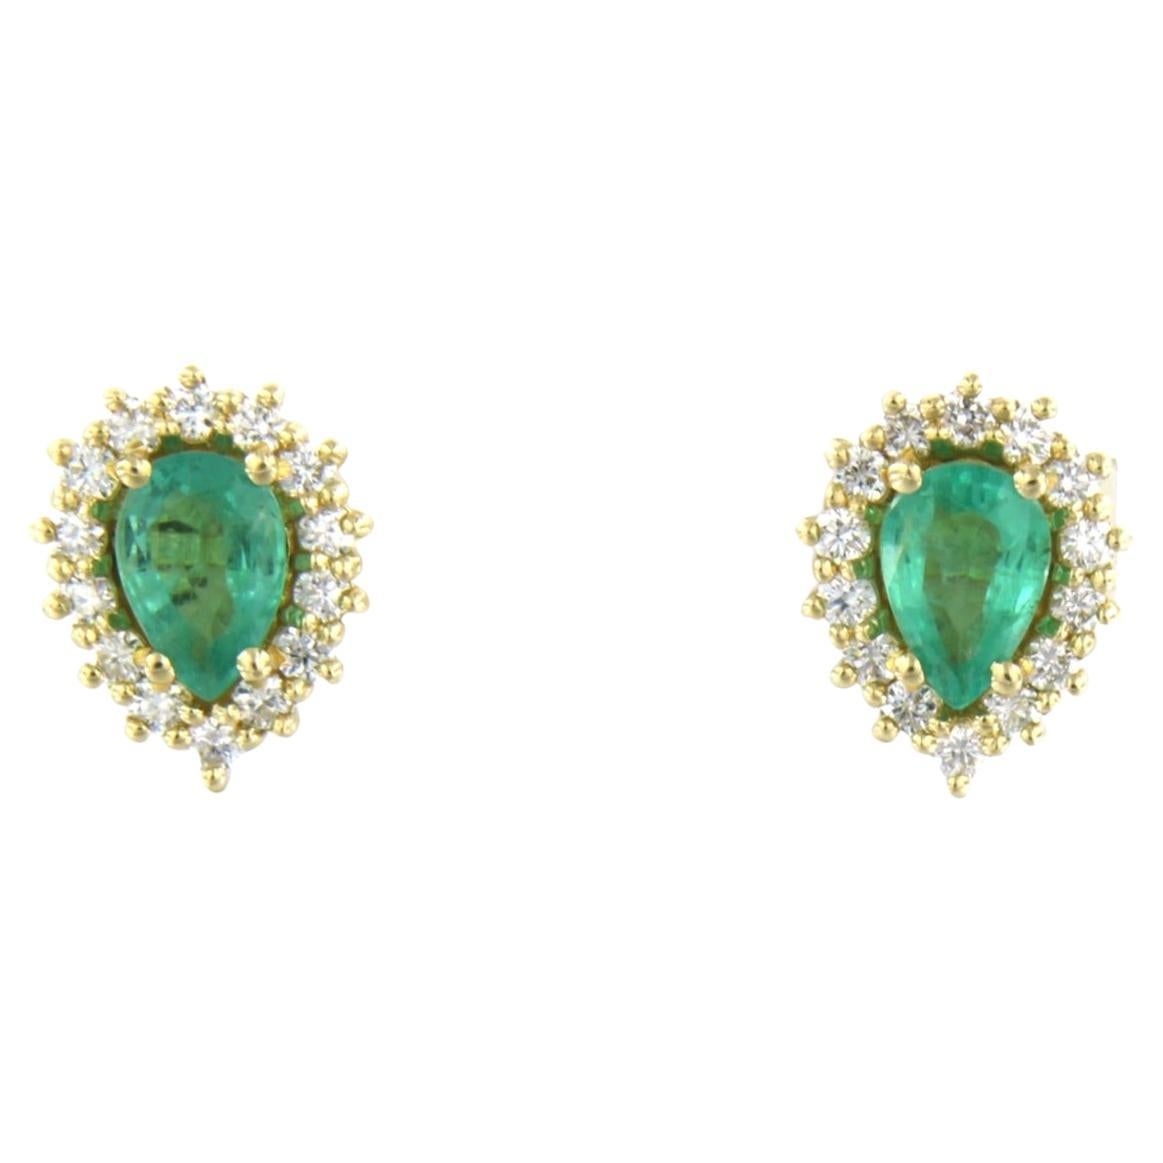 Earrings set with emerald and diamonds 18k yellow gold